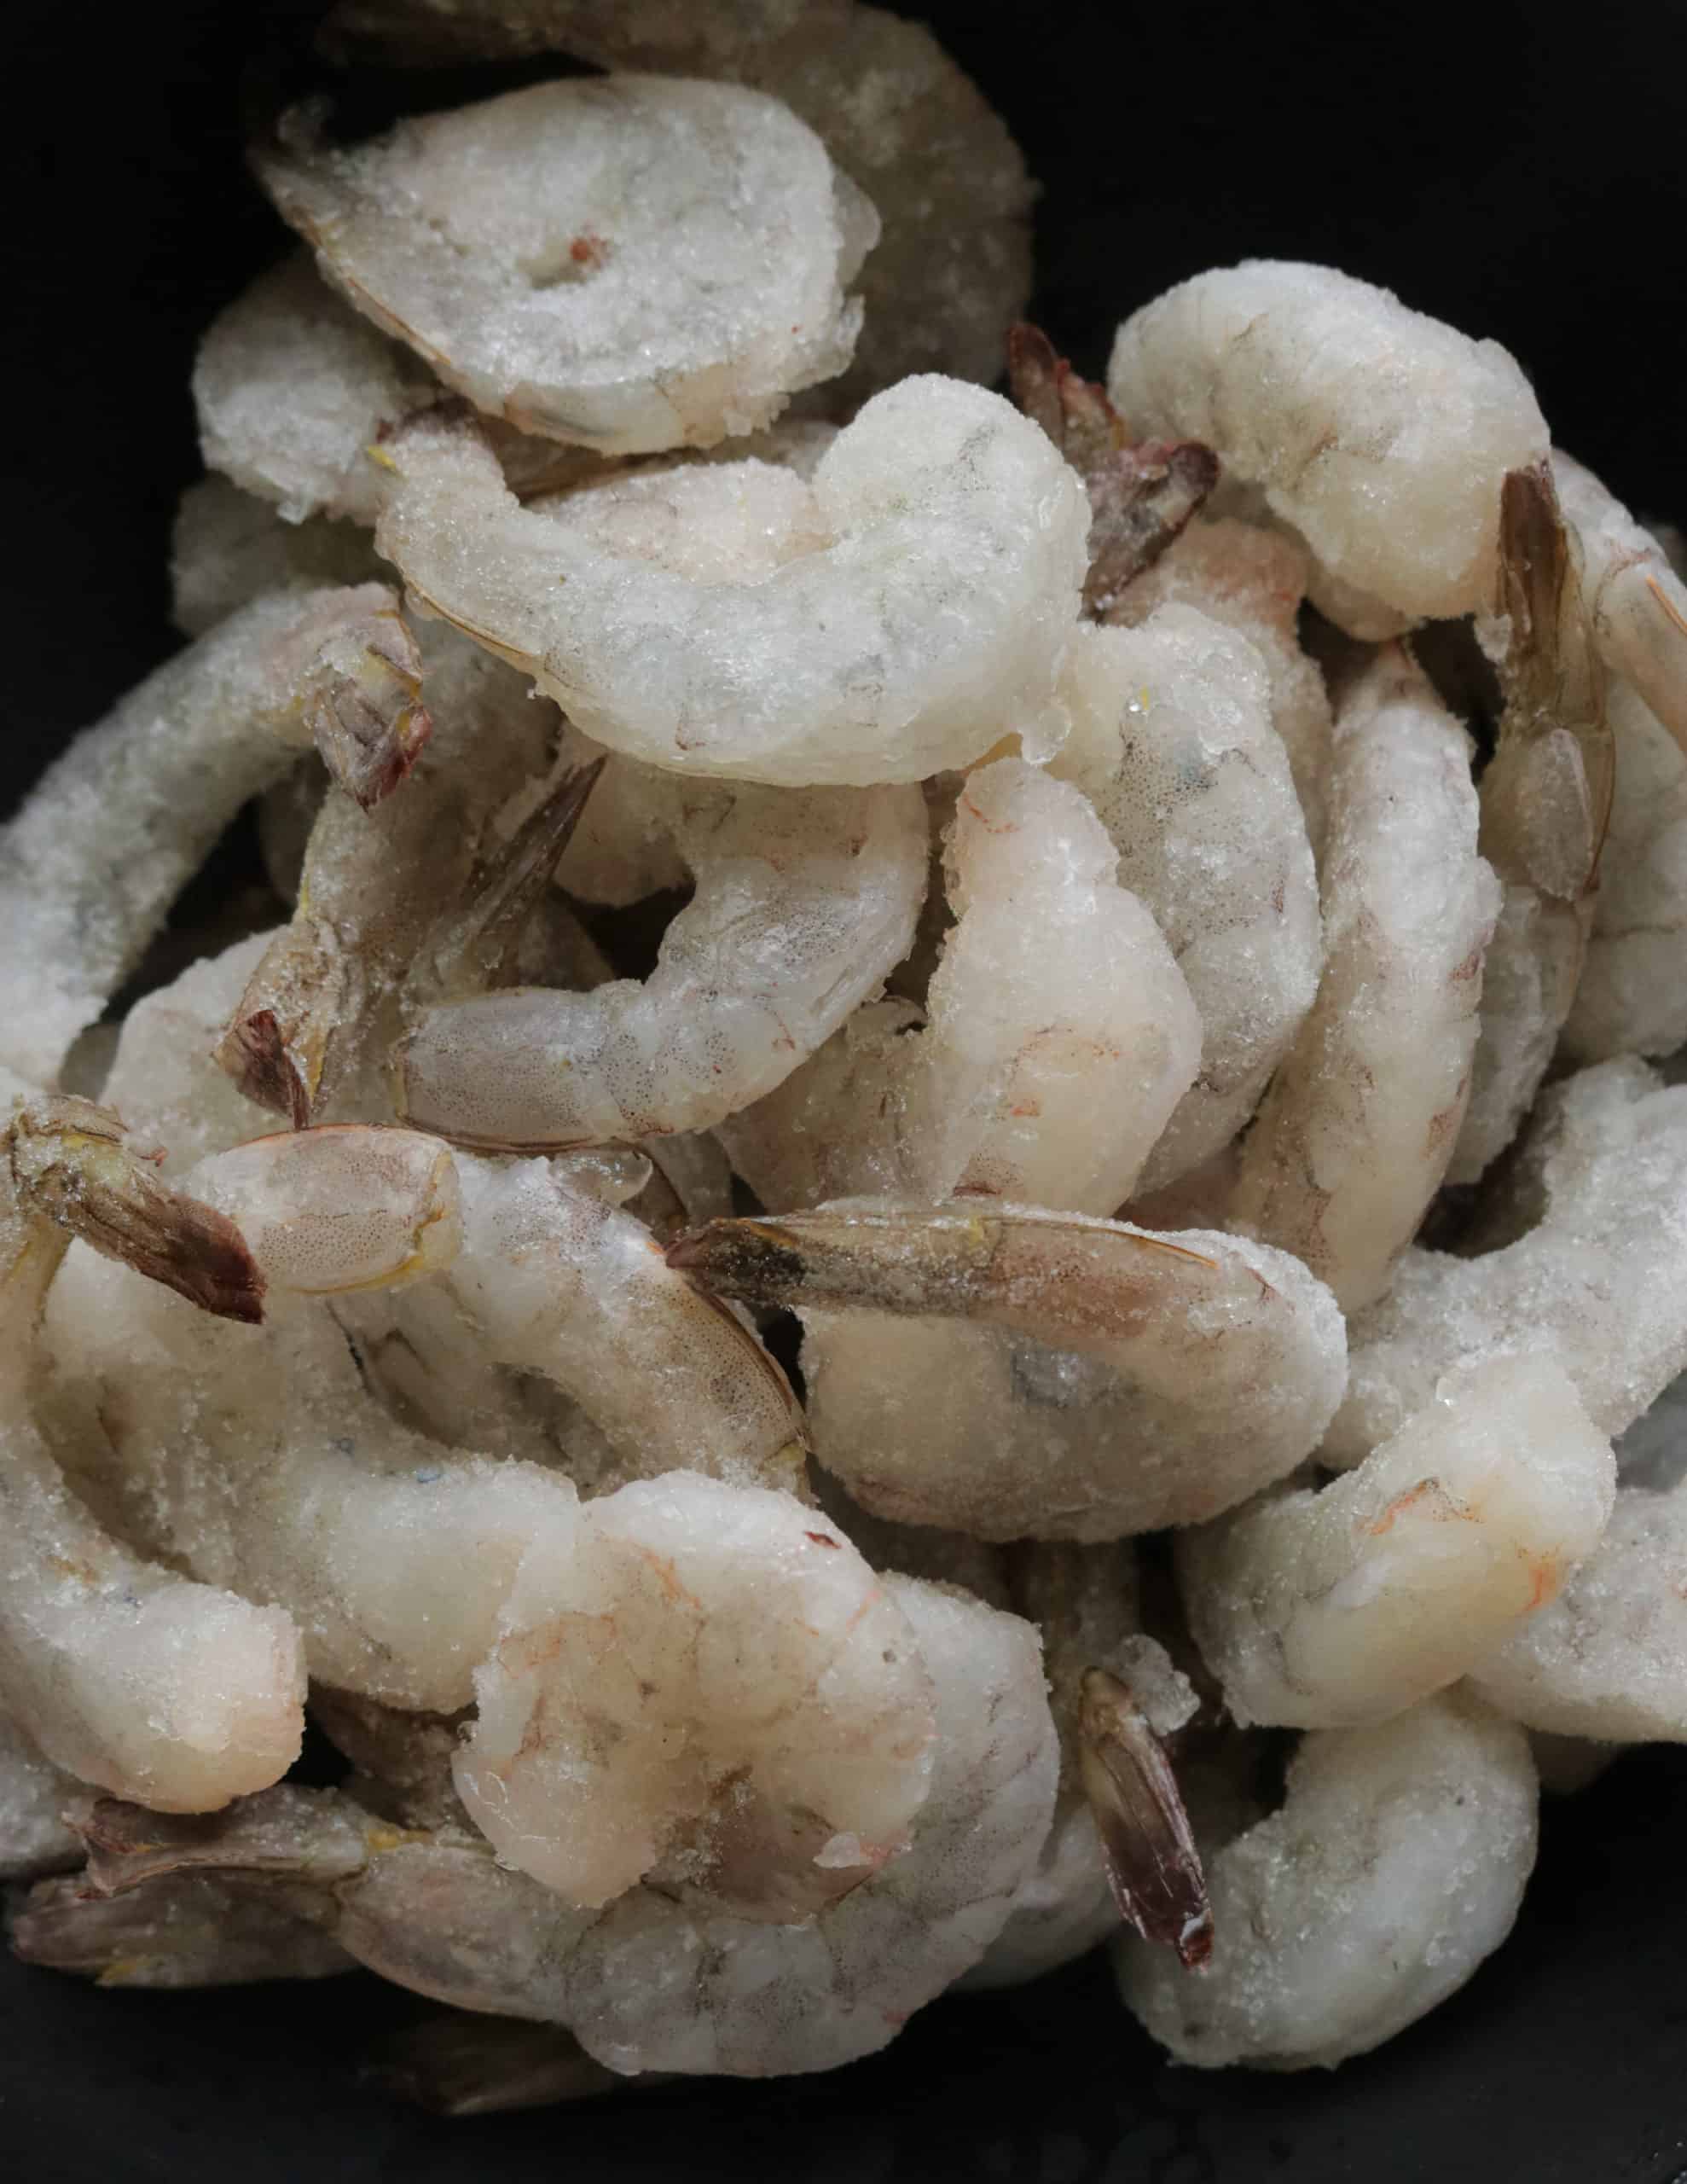 how to defrost/thaw shrimp